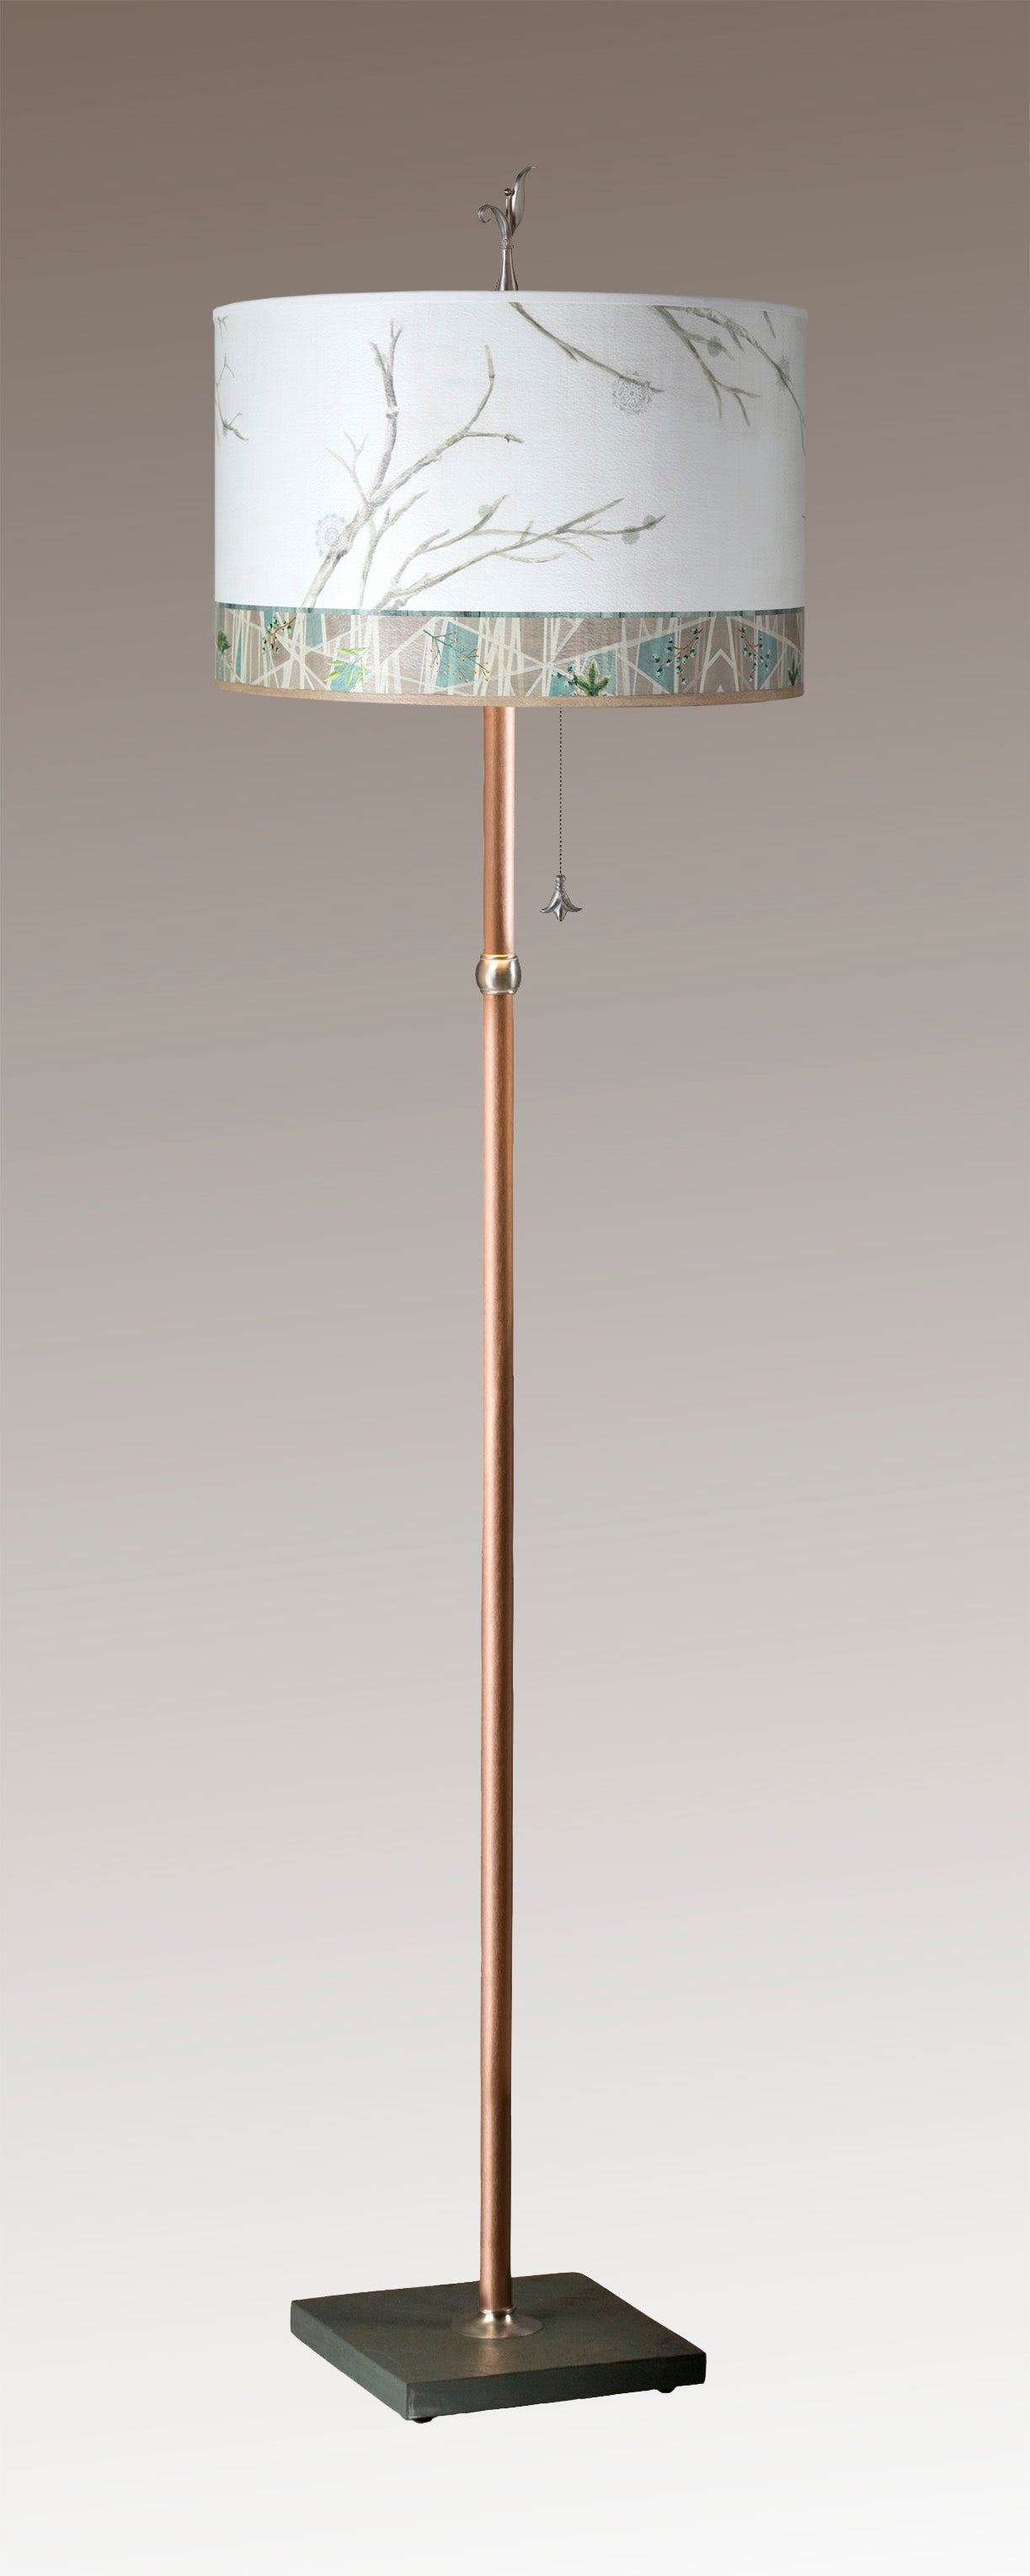 Janna Ugone & Co Floor Lamps Copper Floor Lamp with Large Drum Lampshade in Prism Branch